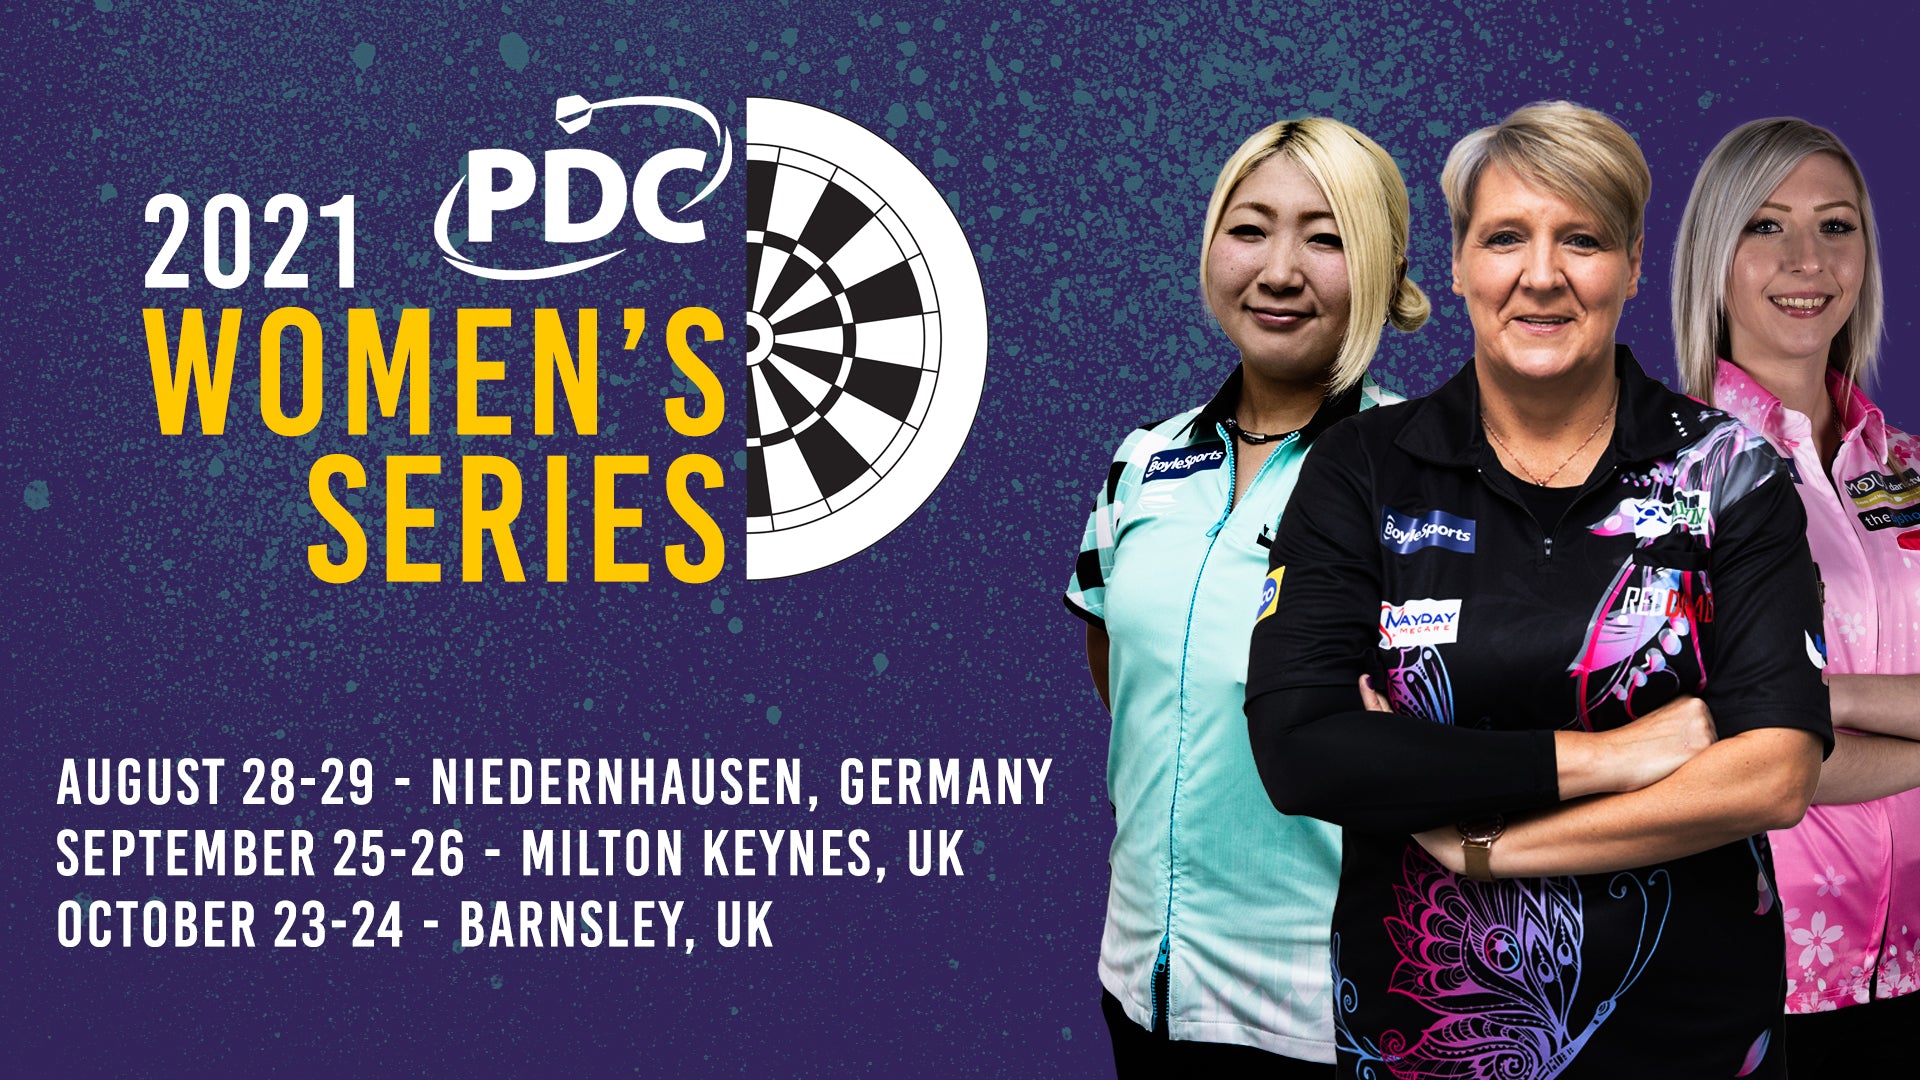 Expanded PDC Women’s Series to take place across Europe in 2021